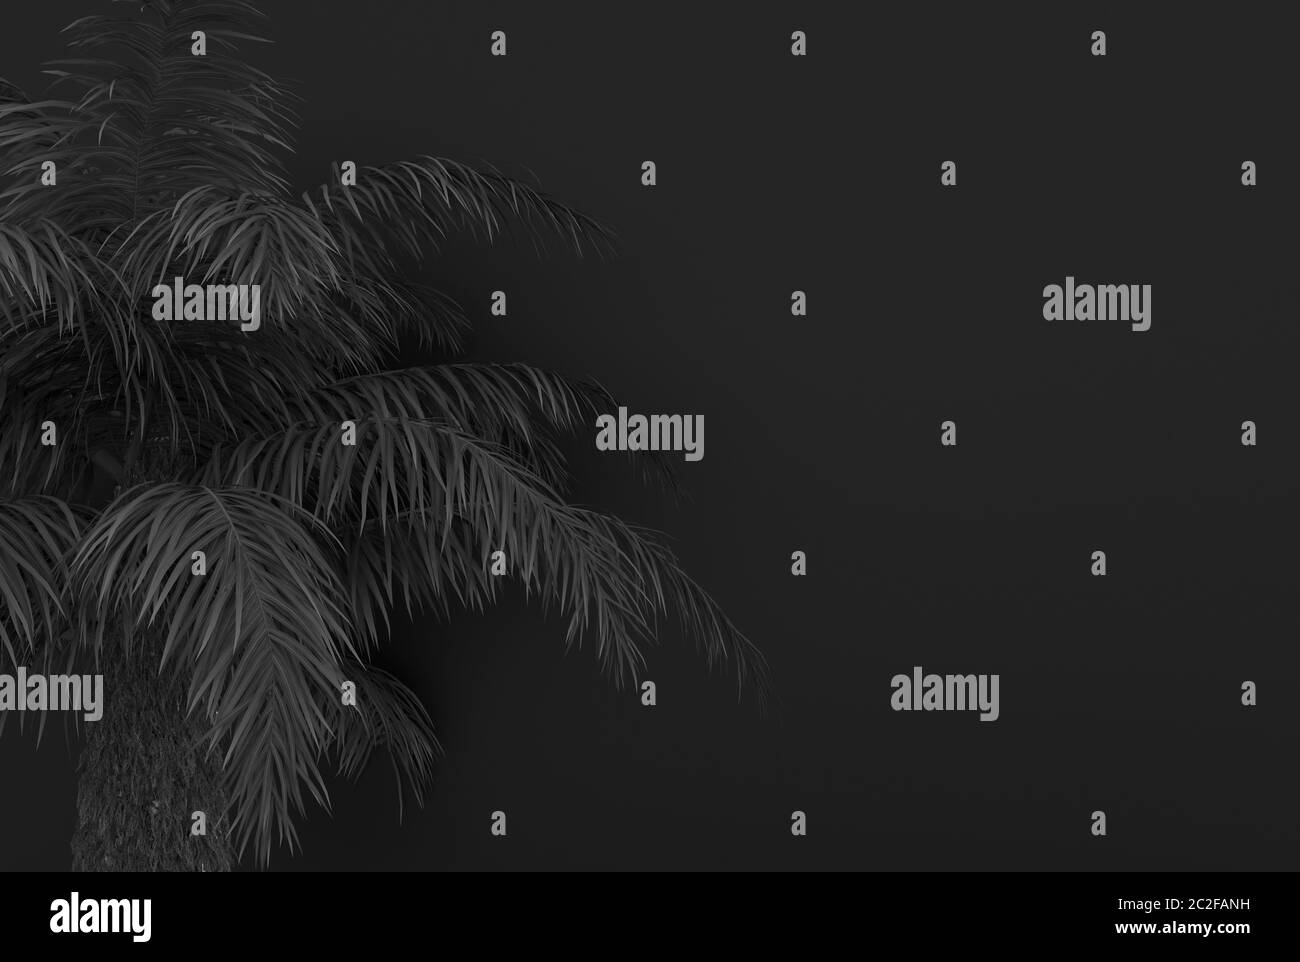 Palm tree with black palm leaves on a black background. Monochrome black foliage. Conceptual creative illustration with copy space. 3D rendering. Stock Photo